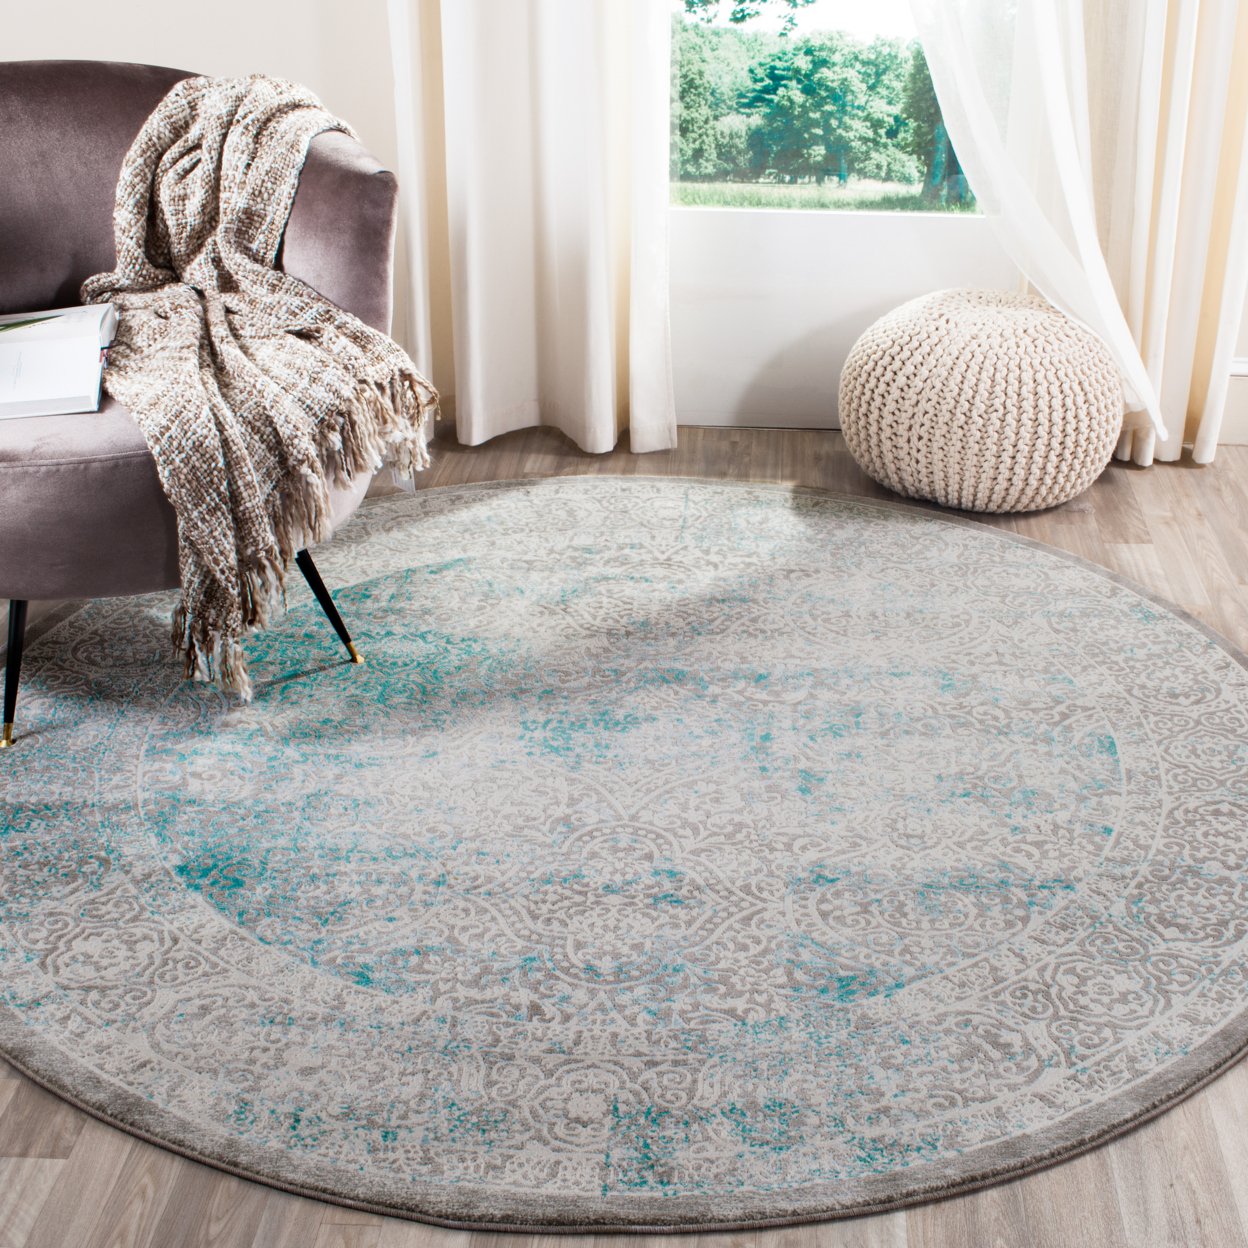 SAFAVIEH Passion Collection PAS401B Turquoise / Ivory Rug - 2' 2 X 10'